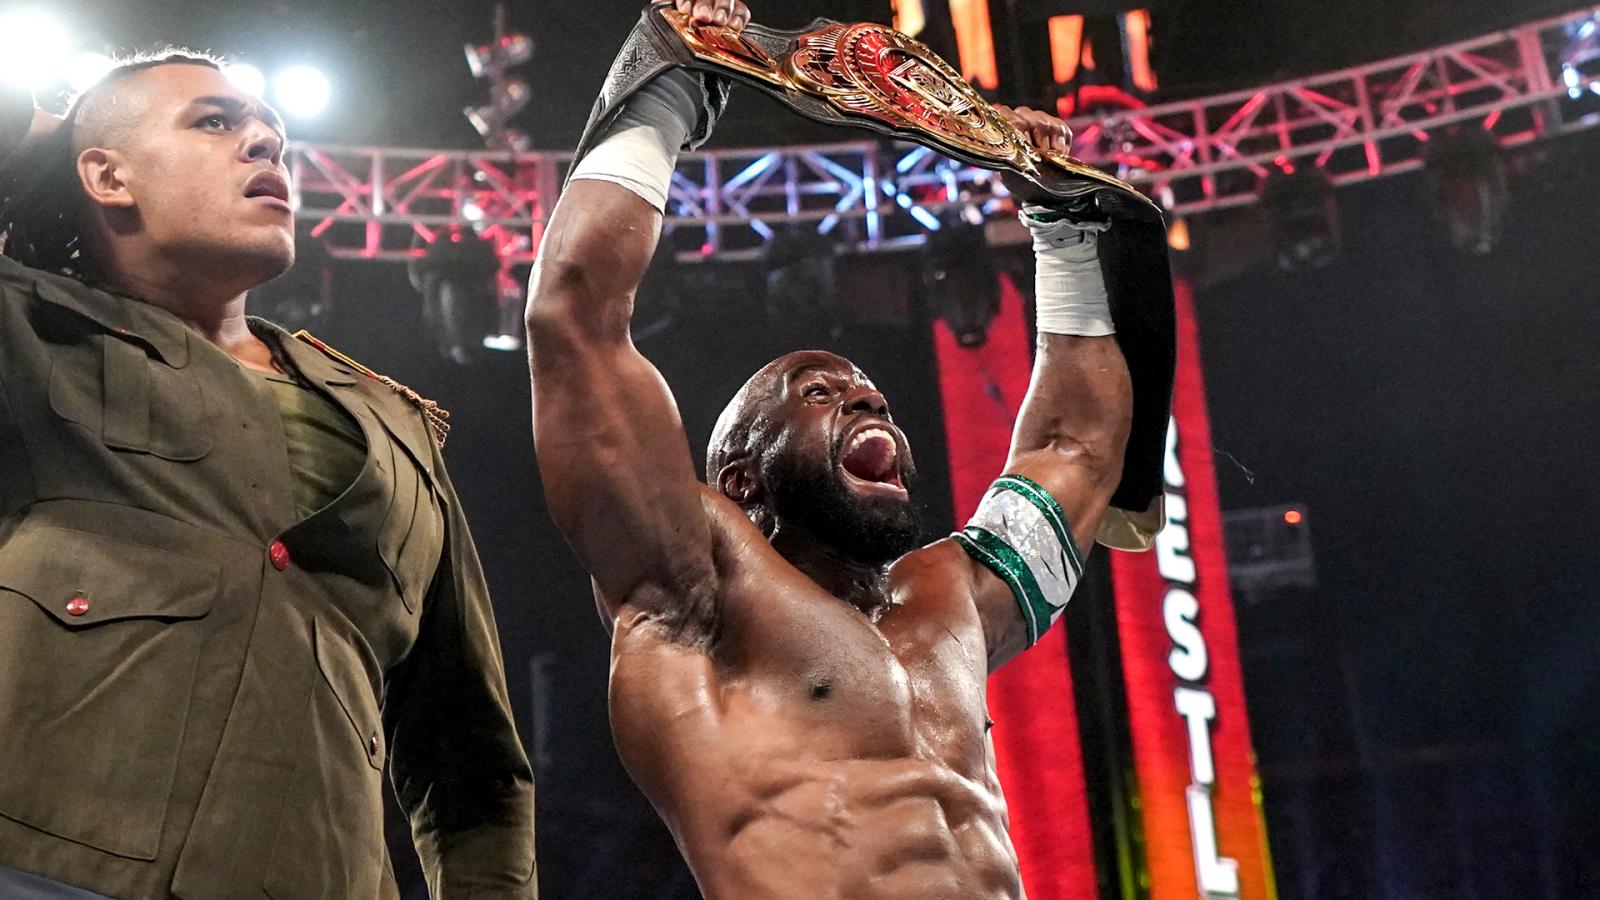 Video: Apollo Crews Appears With Dabba Kato After WrestleMania Win